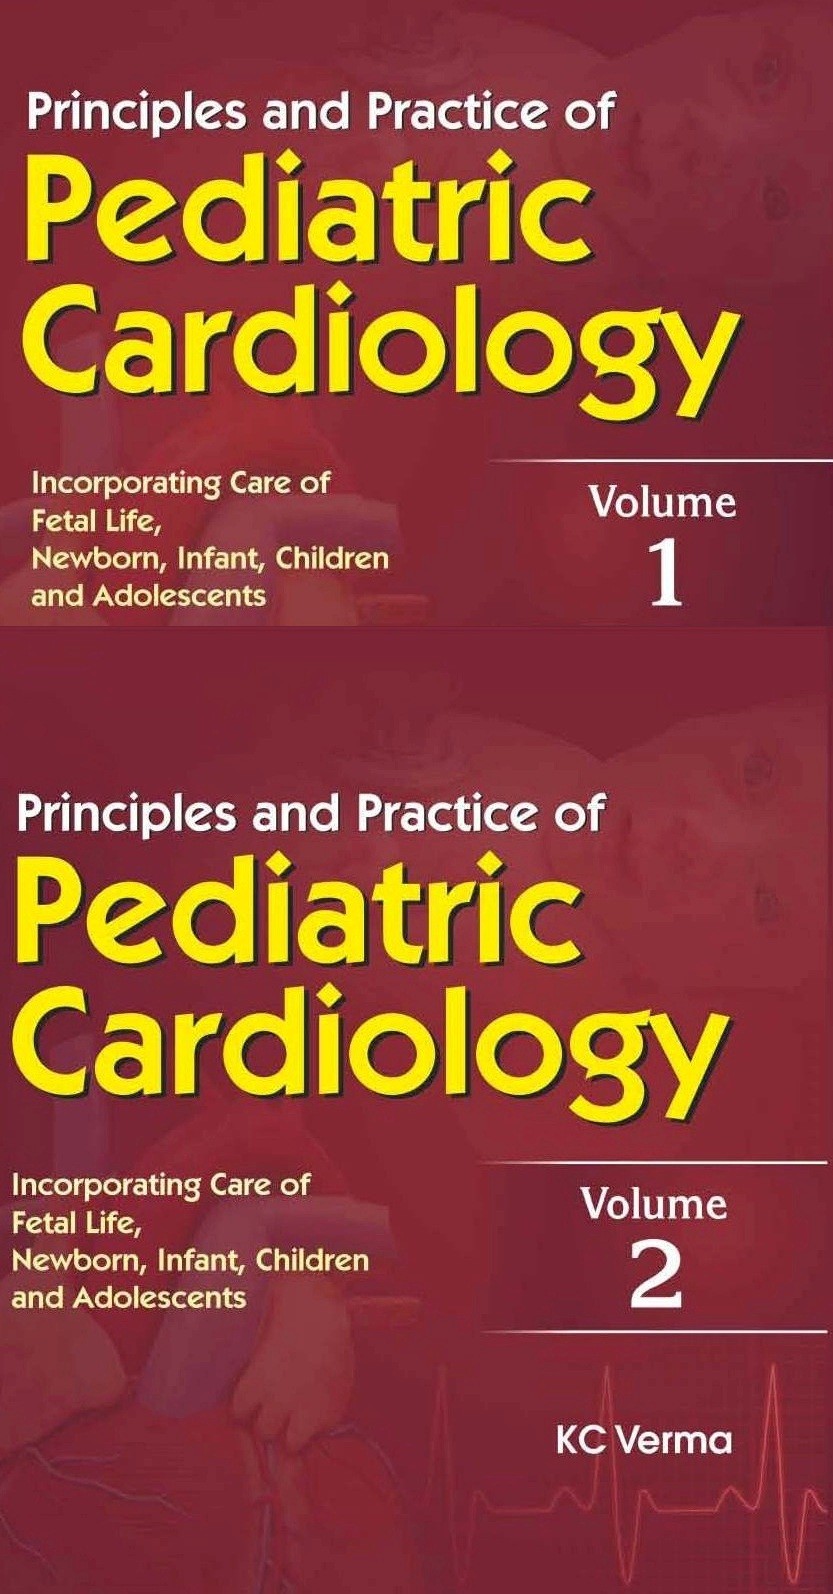 Principles And Practice Of Pediatric Cardiology, 2 Vol Set (Hb 2016)